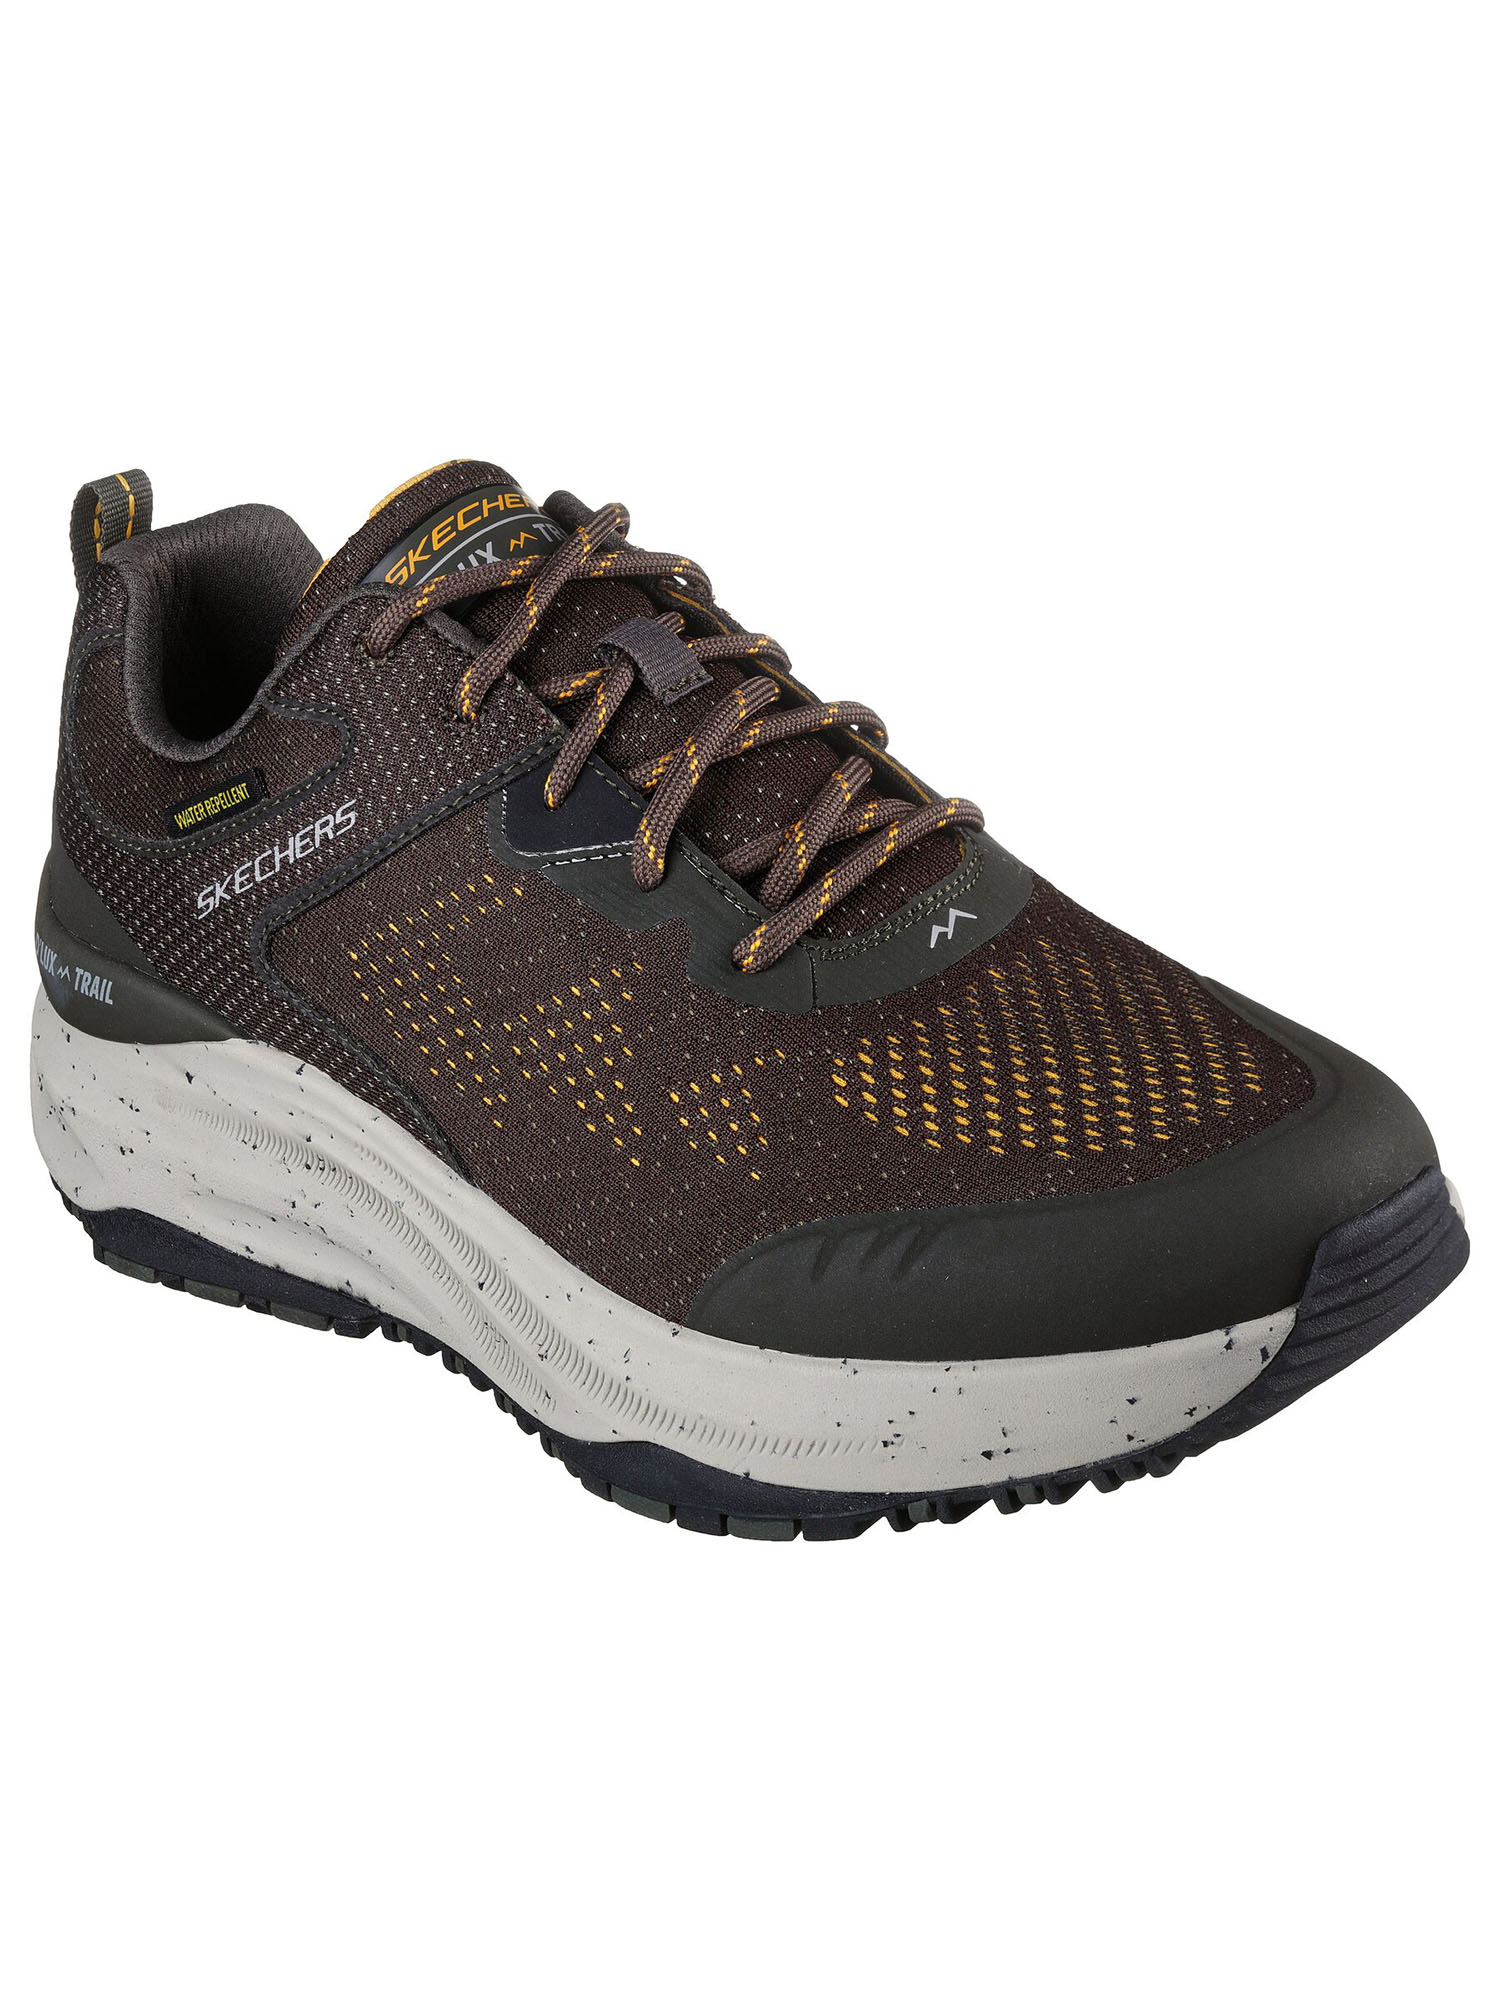 SKECHERS RELAXED FIT - OLIVA